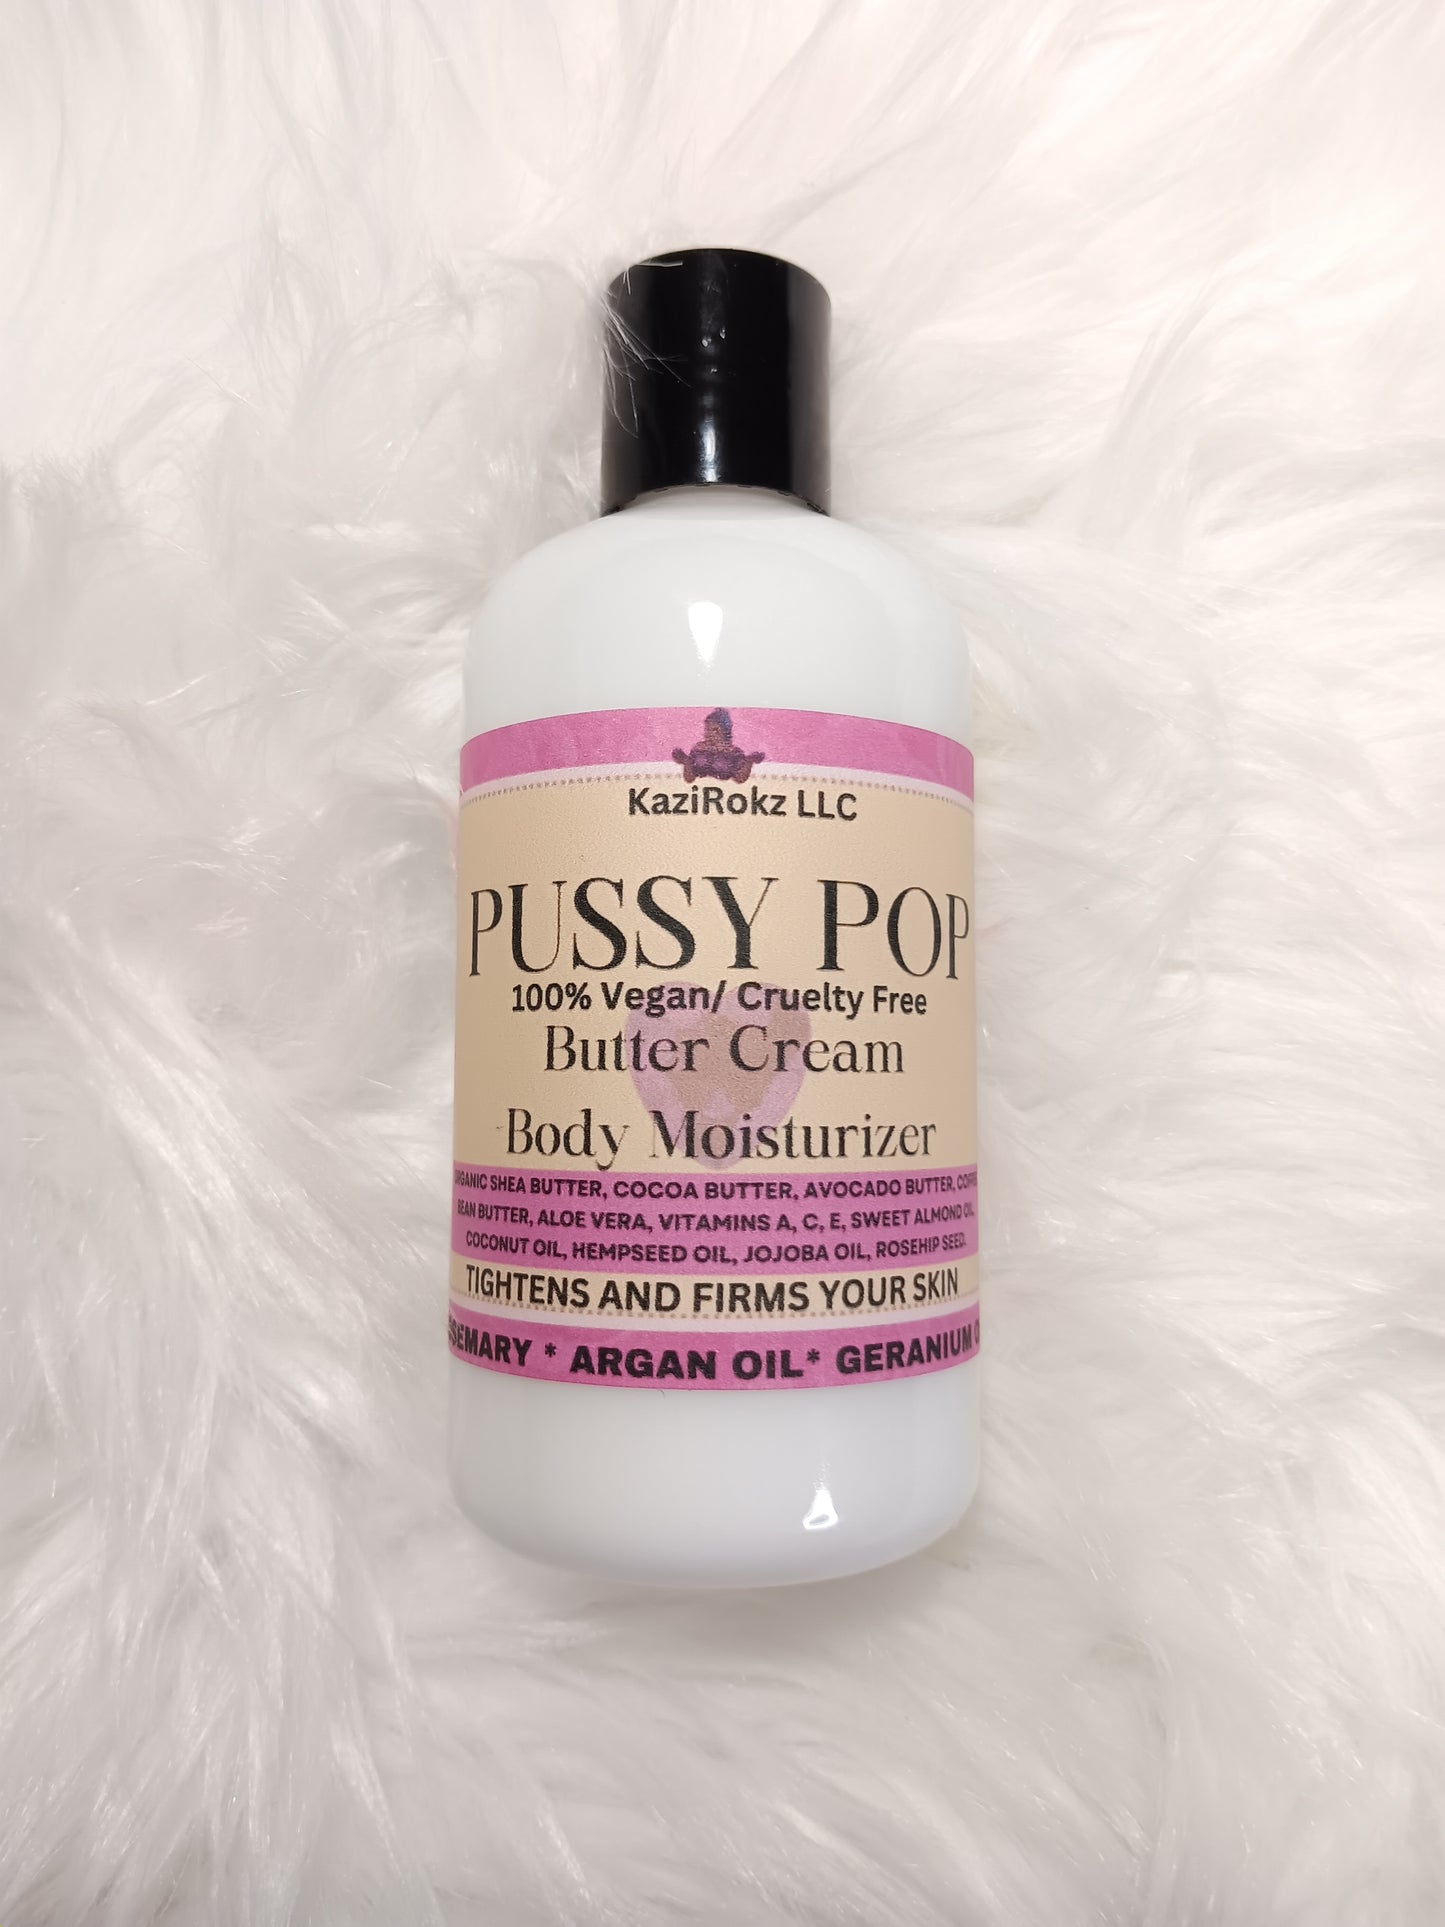 PUSSY POP "YONI" BUTTER CREAM 8oz. Ultra hydrating and moisturizing. Tightens and Firms your skin, Odor control, 100% Vegan/ Cruelty Free 🌱 🐷!